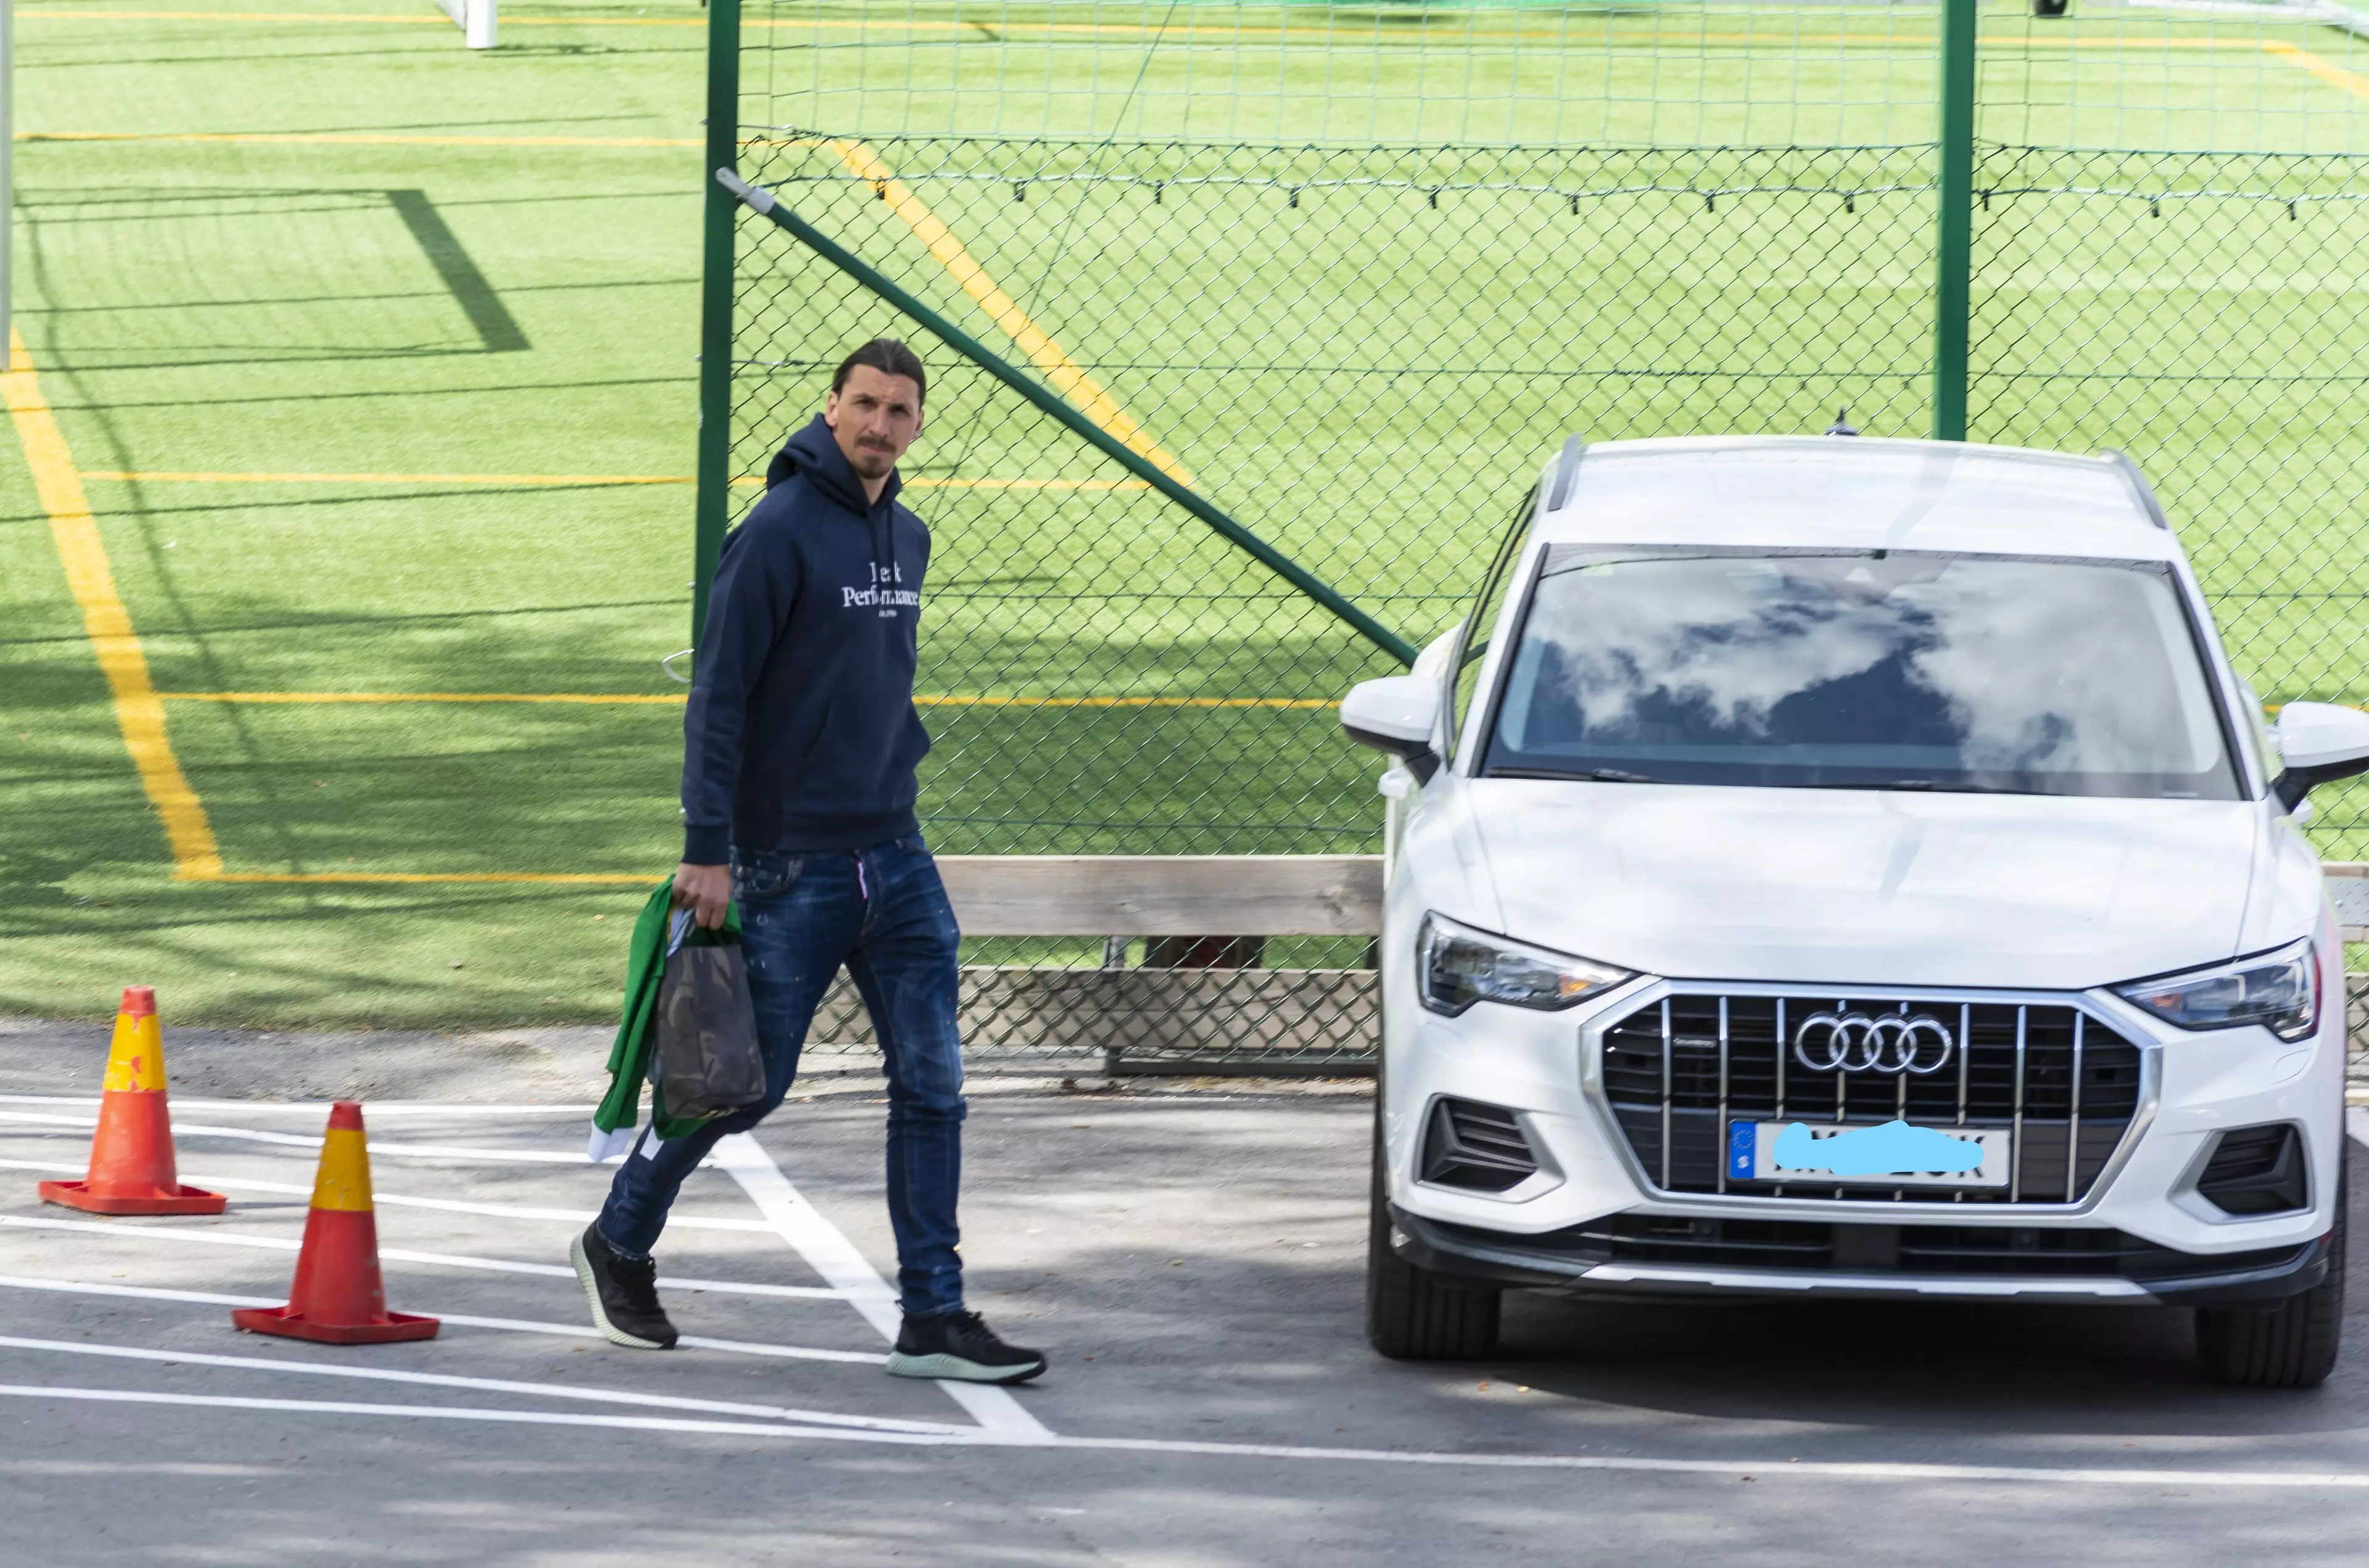 Ibrahimovic at Milan training, but he may not be there much longer. Image: PA Images